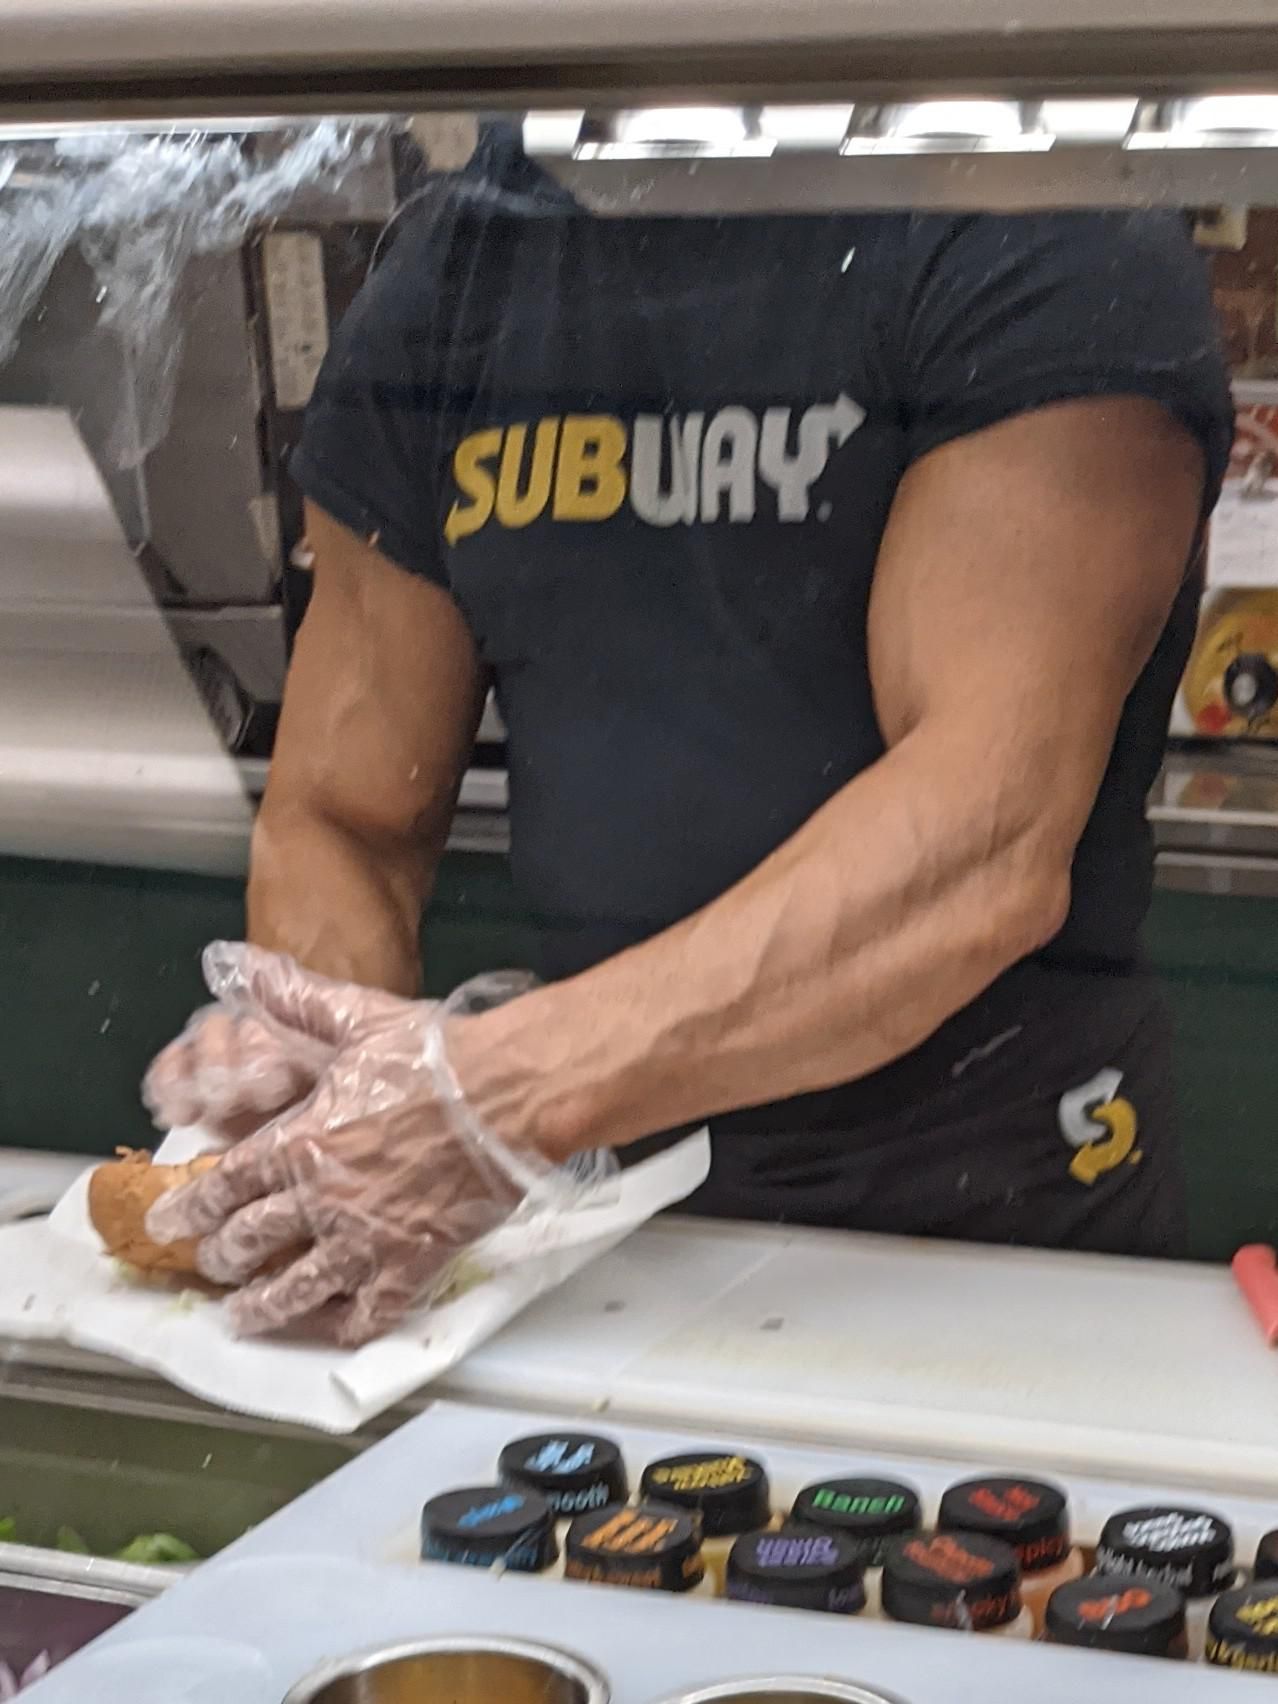 So I went to subway and.. the hulk is making my sandwich